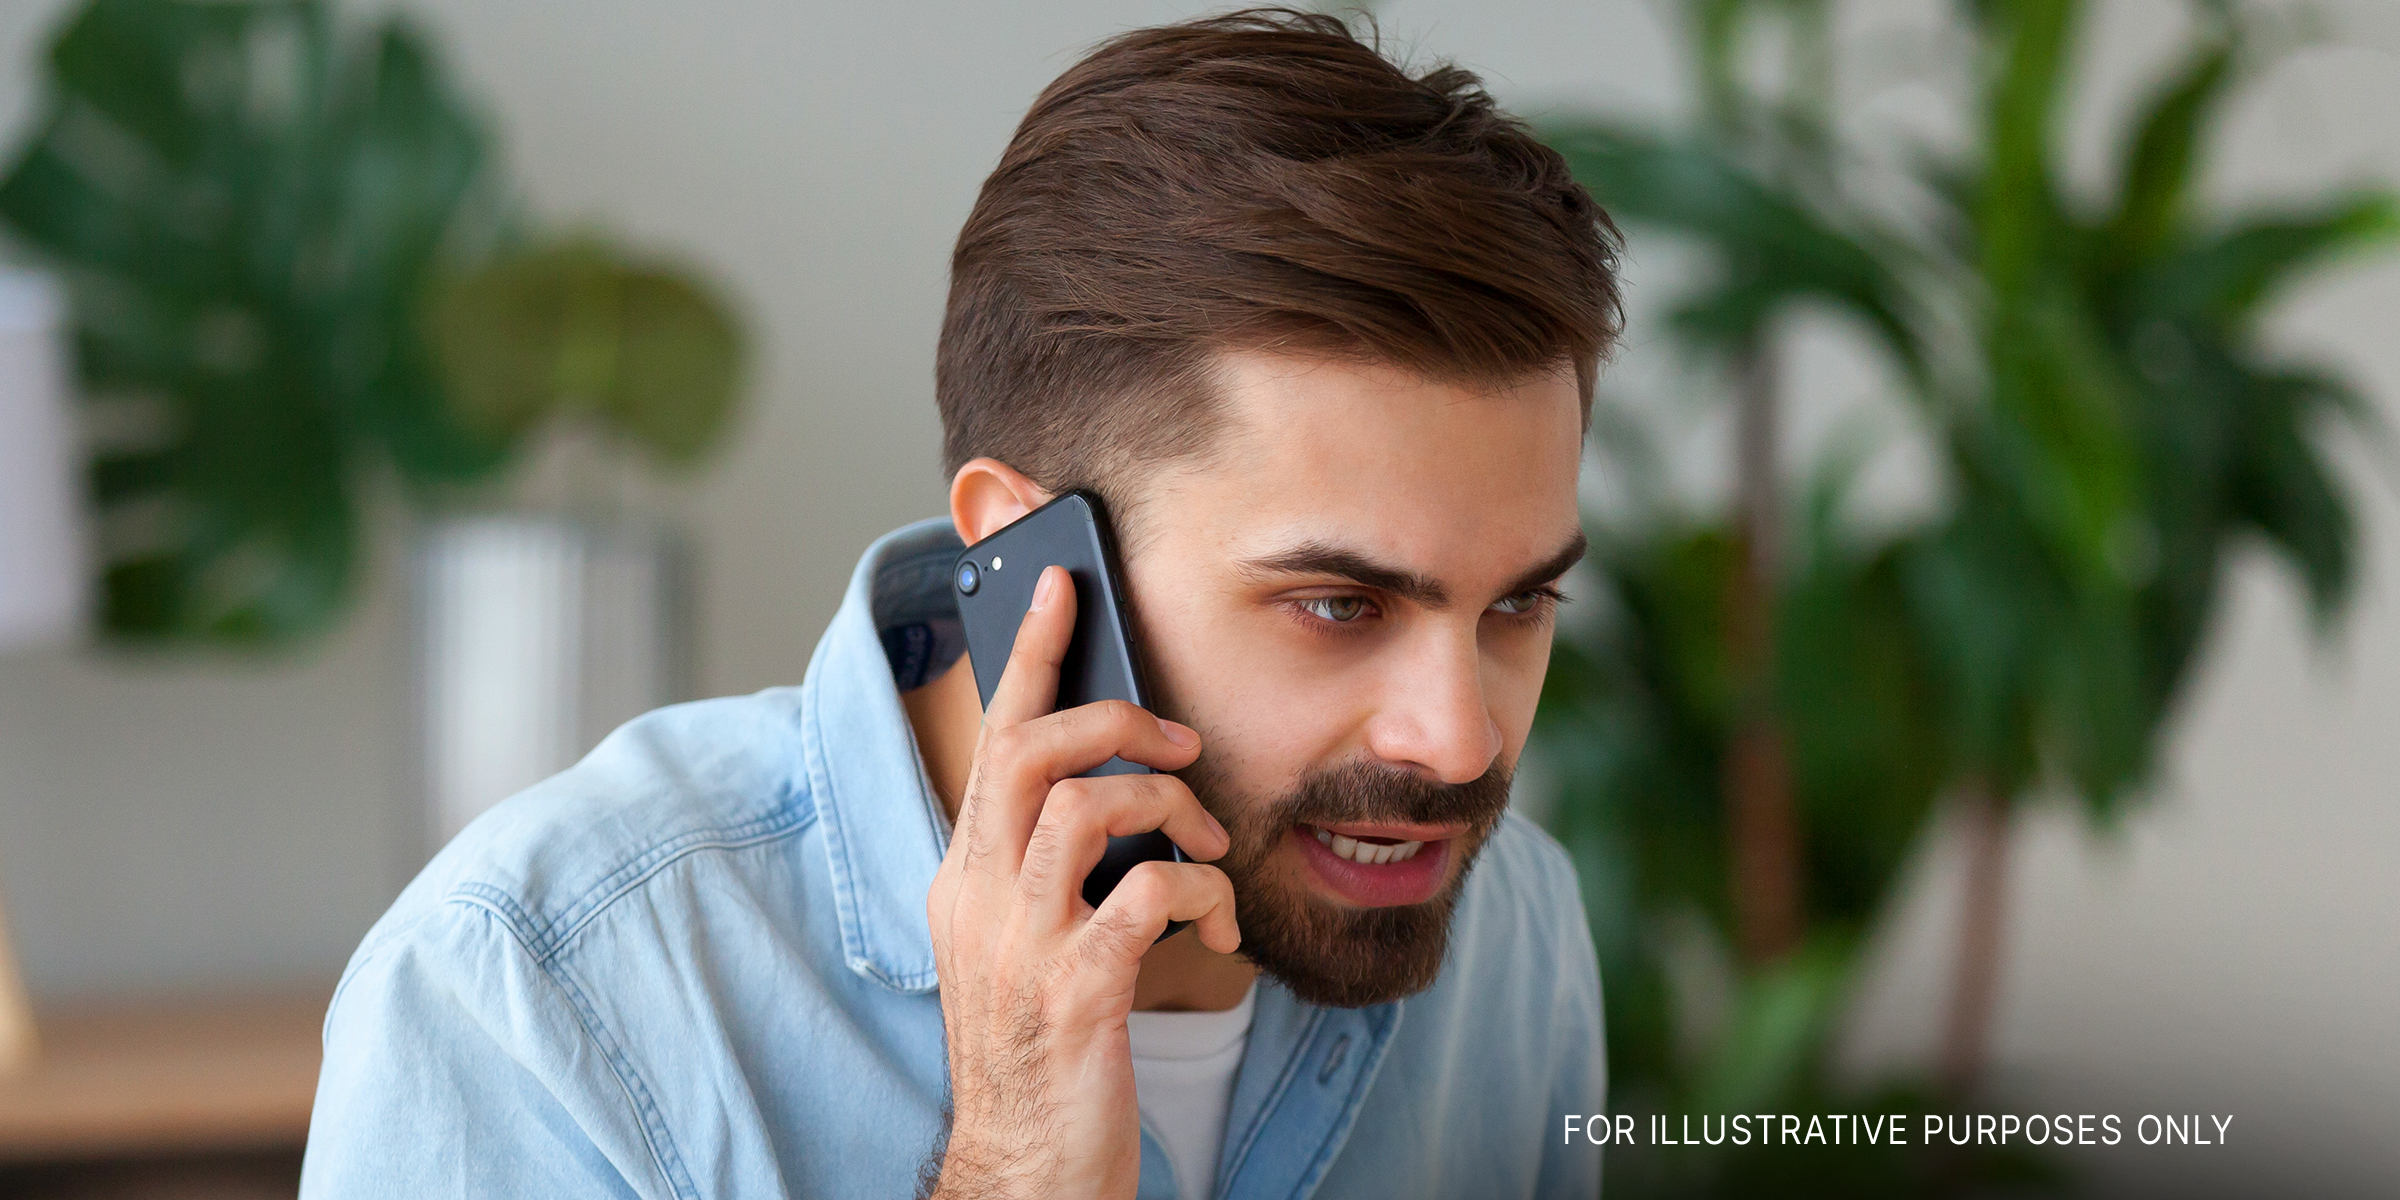 A man on the phone | Source: Shutterstock